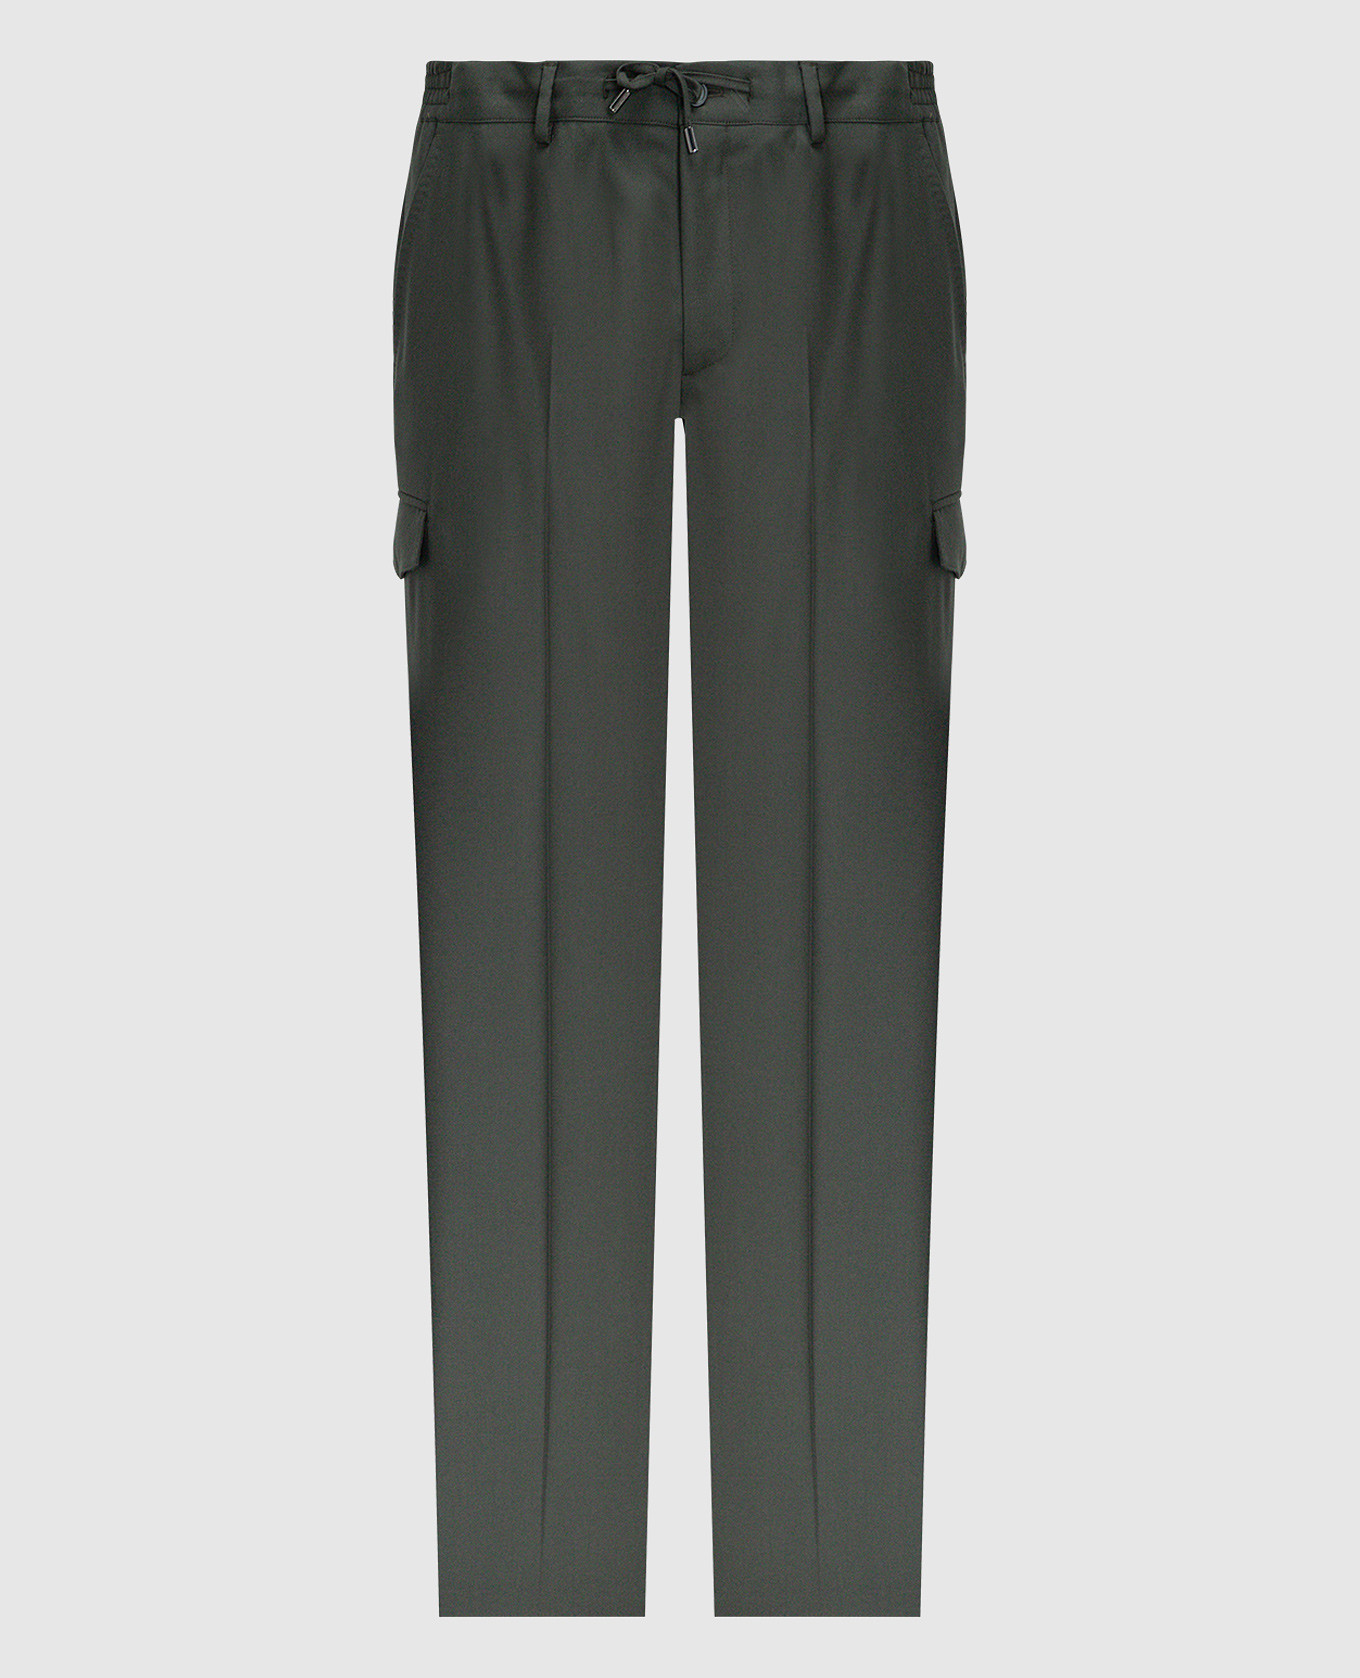 Green wool cargo pants with logo embroidery